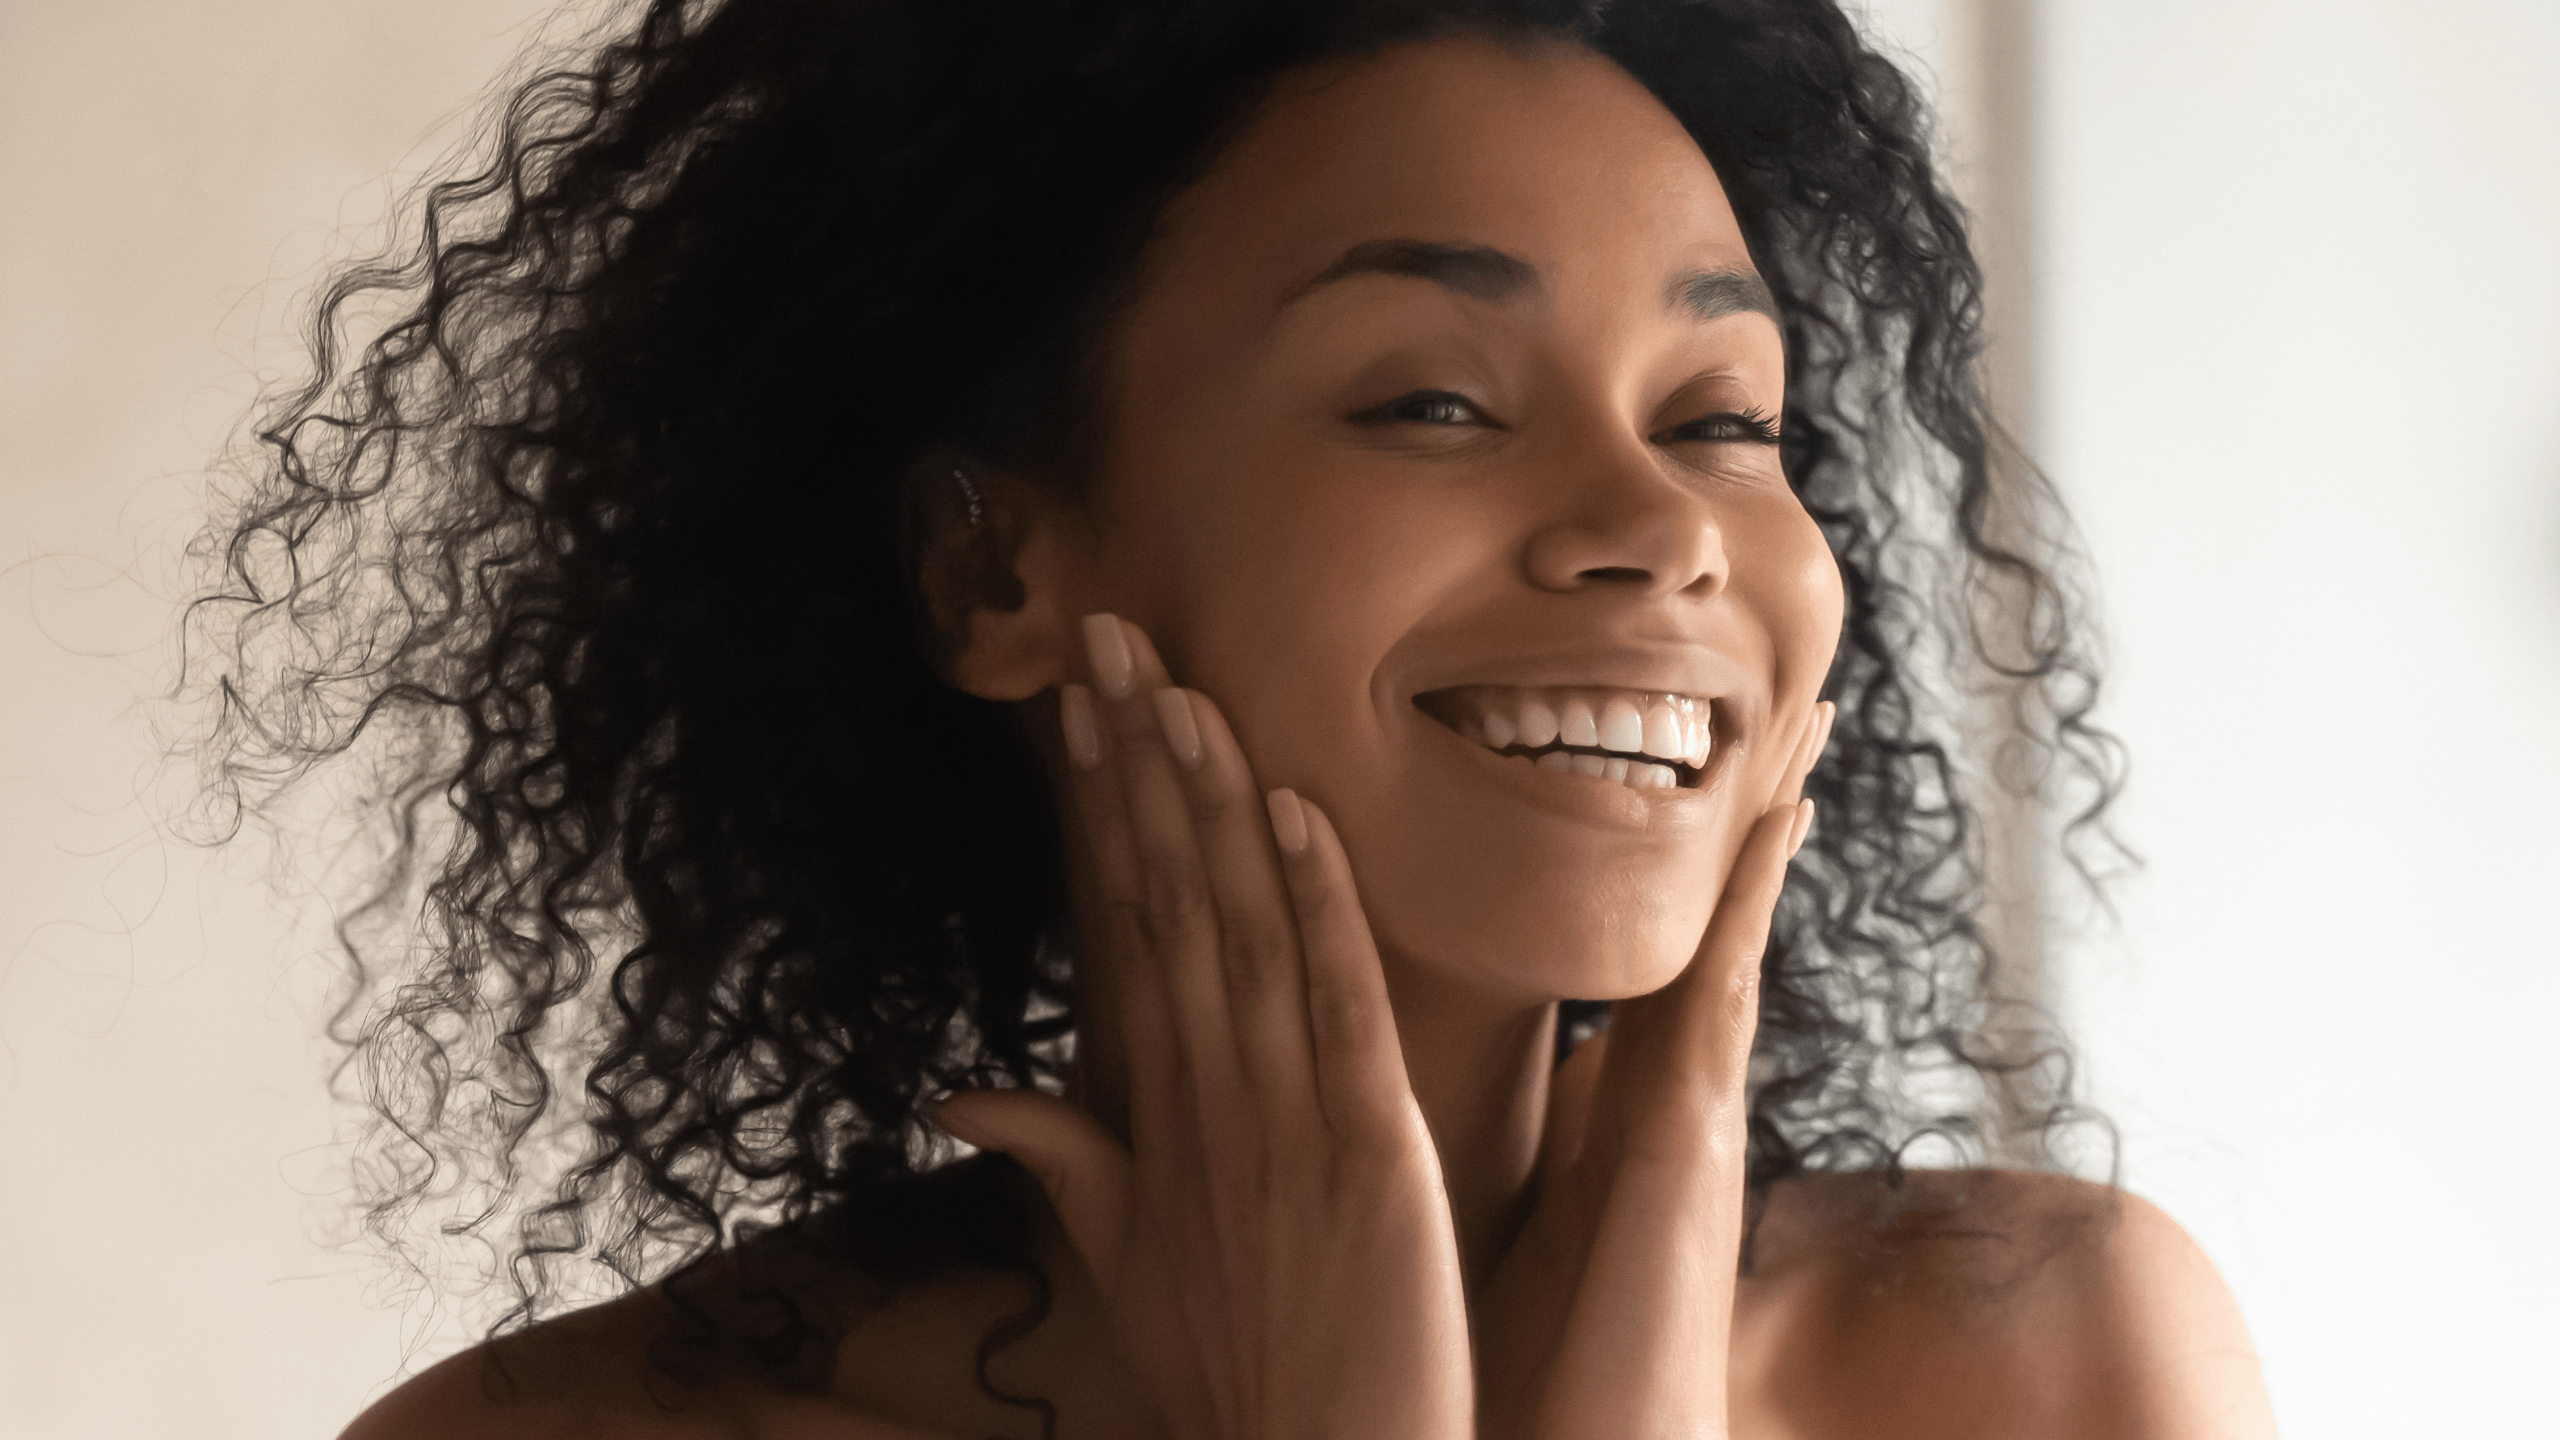 Skin pH: Why Is It Important, and How Do We Maintain pH Balance? - Gladskin